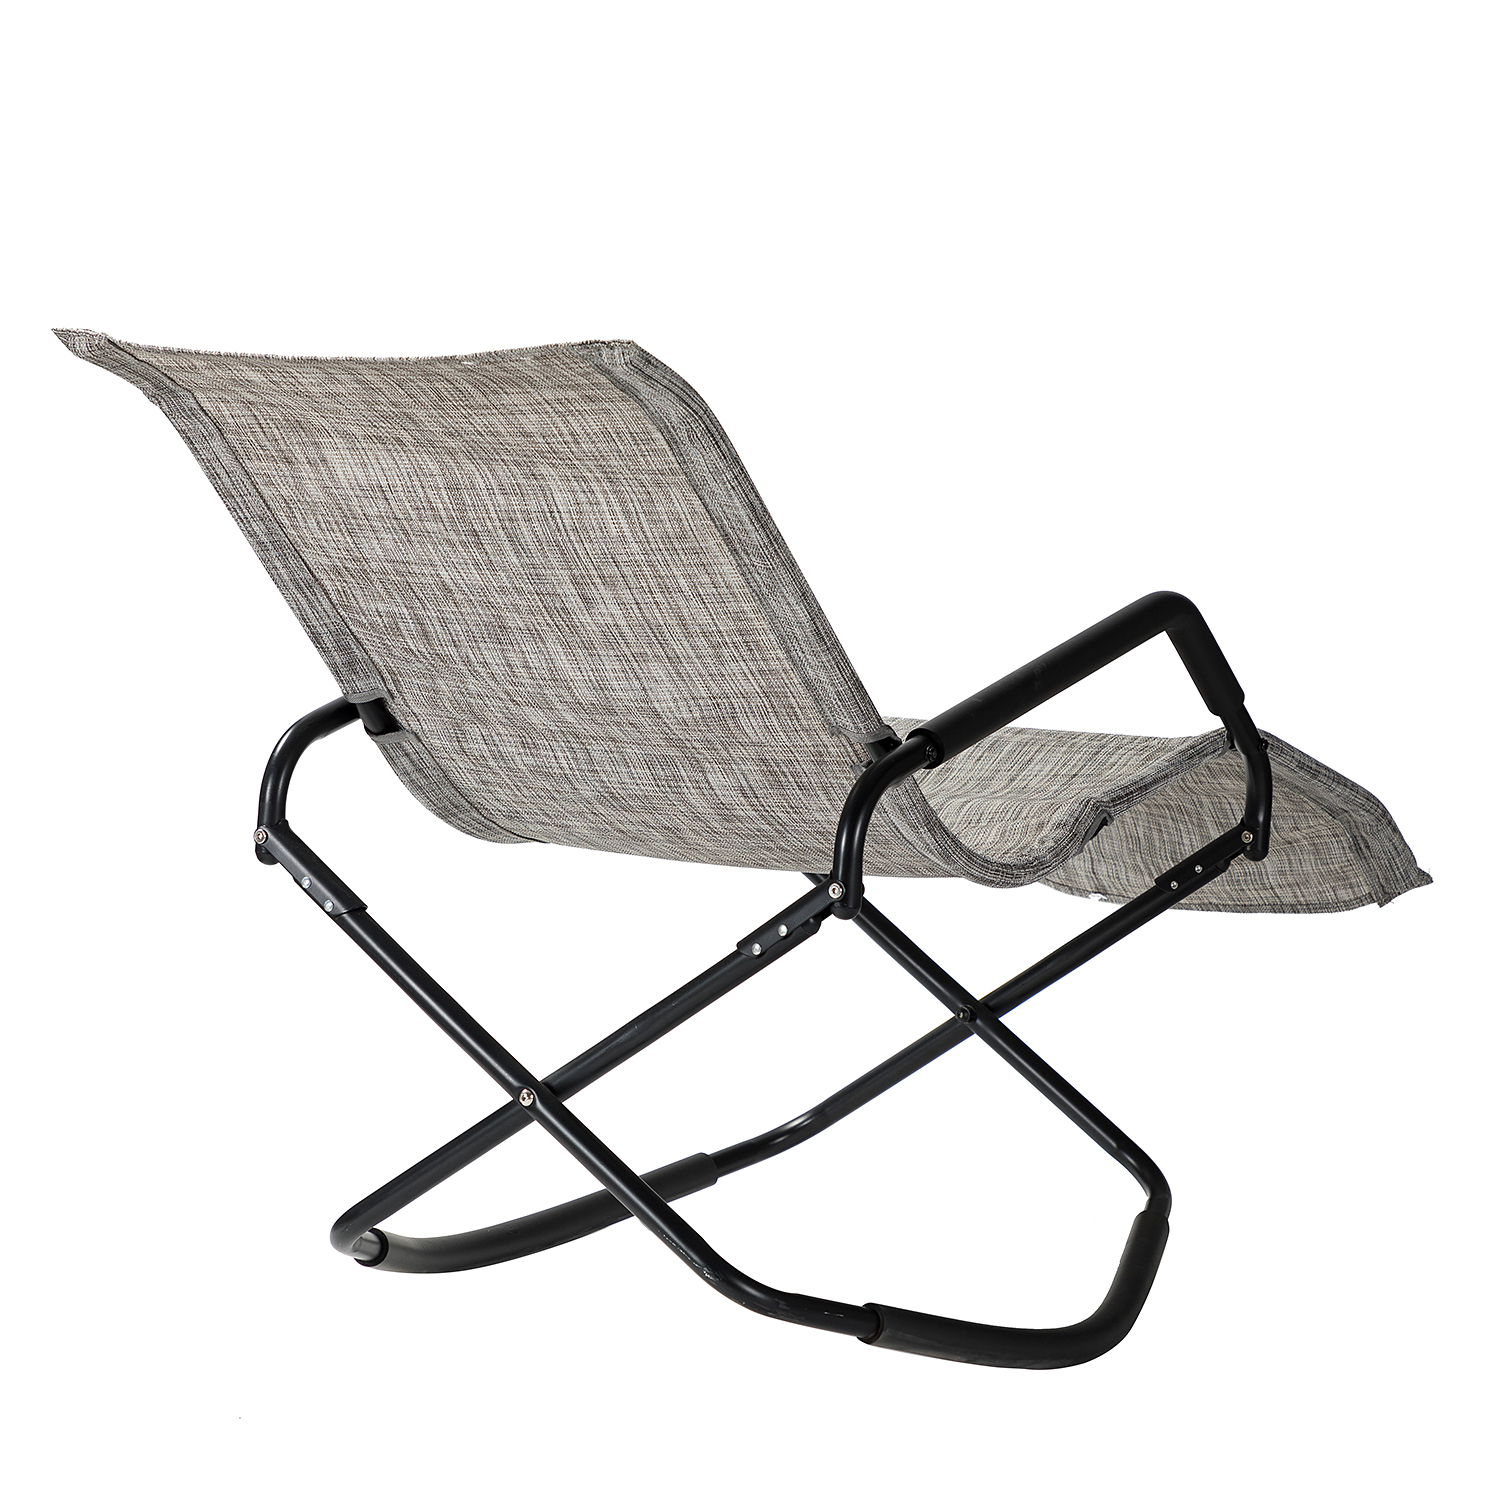 SYNGAR Lounge Chaise Chair, Folding Portable Chaise Chair for Outdoor, Patio Rocking Reclining Chair with Lightweight Design, Camping Beach Chair with Armrest, Lounge Chair for Pool, Lawn, Deck, D7846 - image 3 of 10